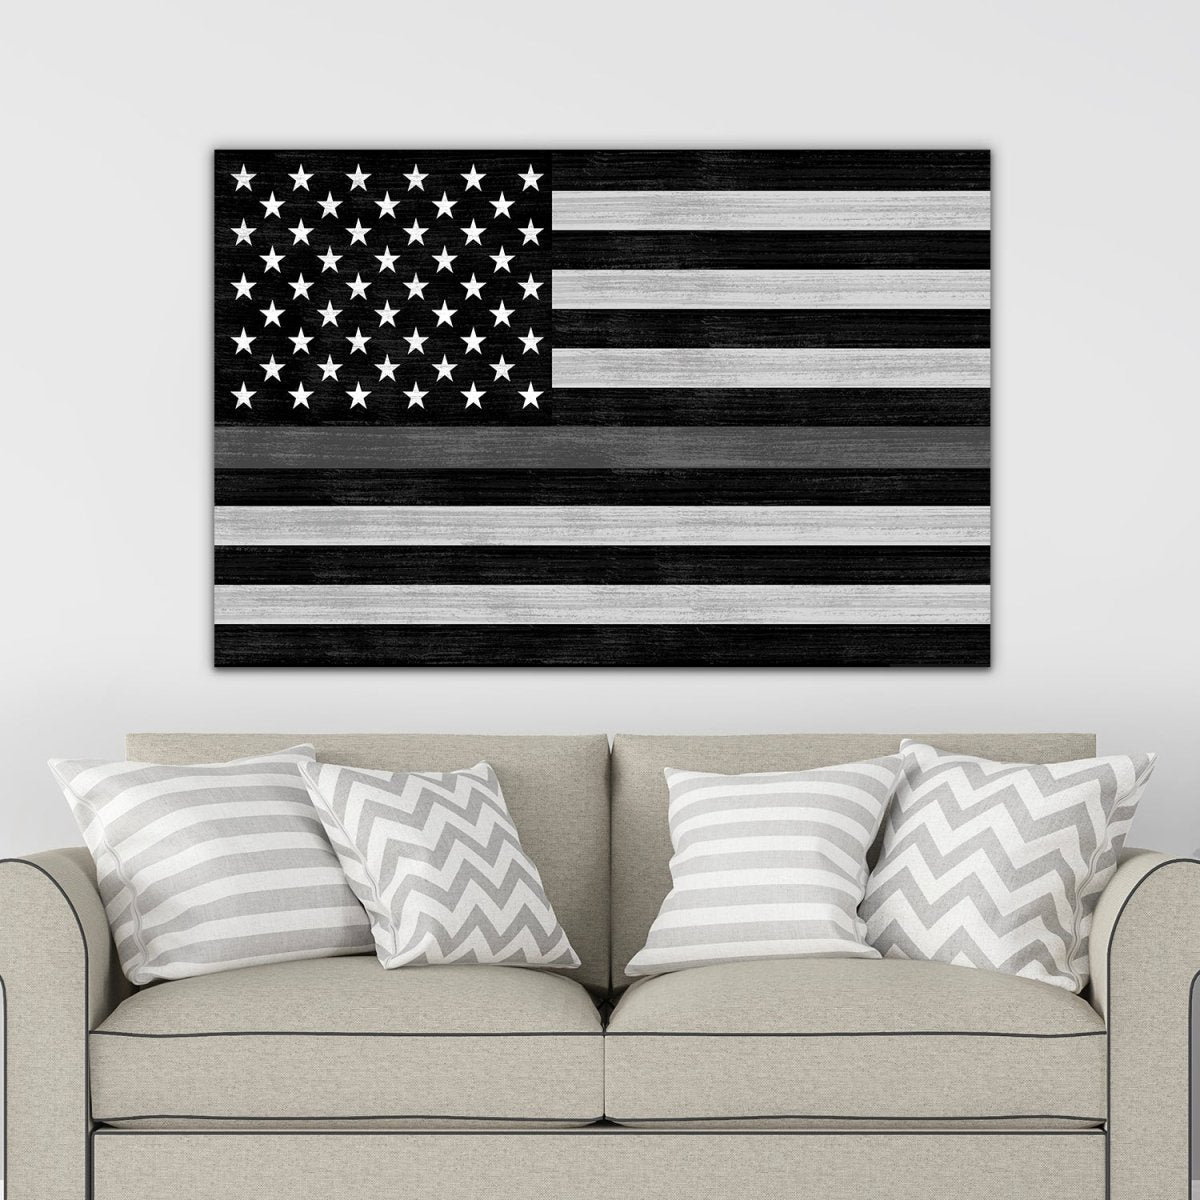 Correctional Officer Flag Sign in Living Room - Pretty Perfect Studio